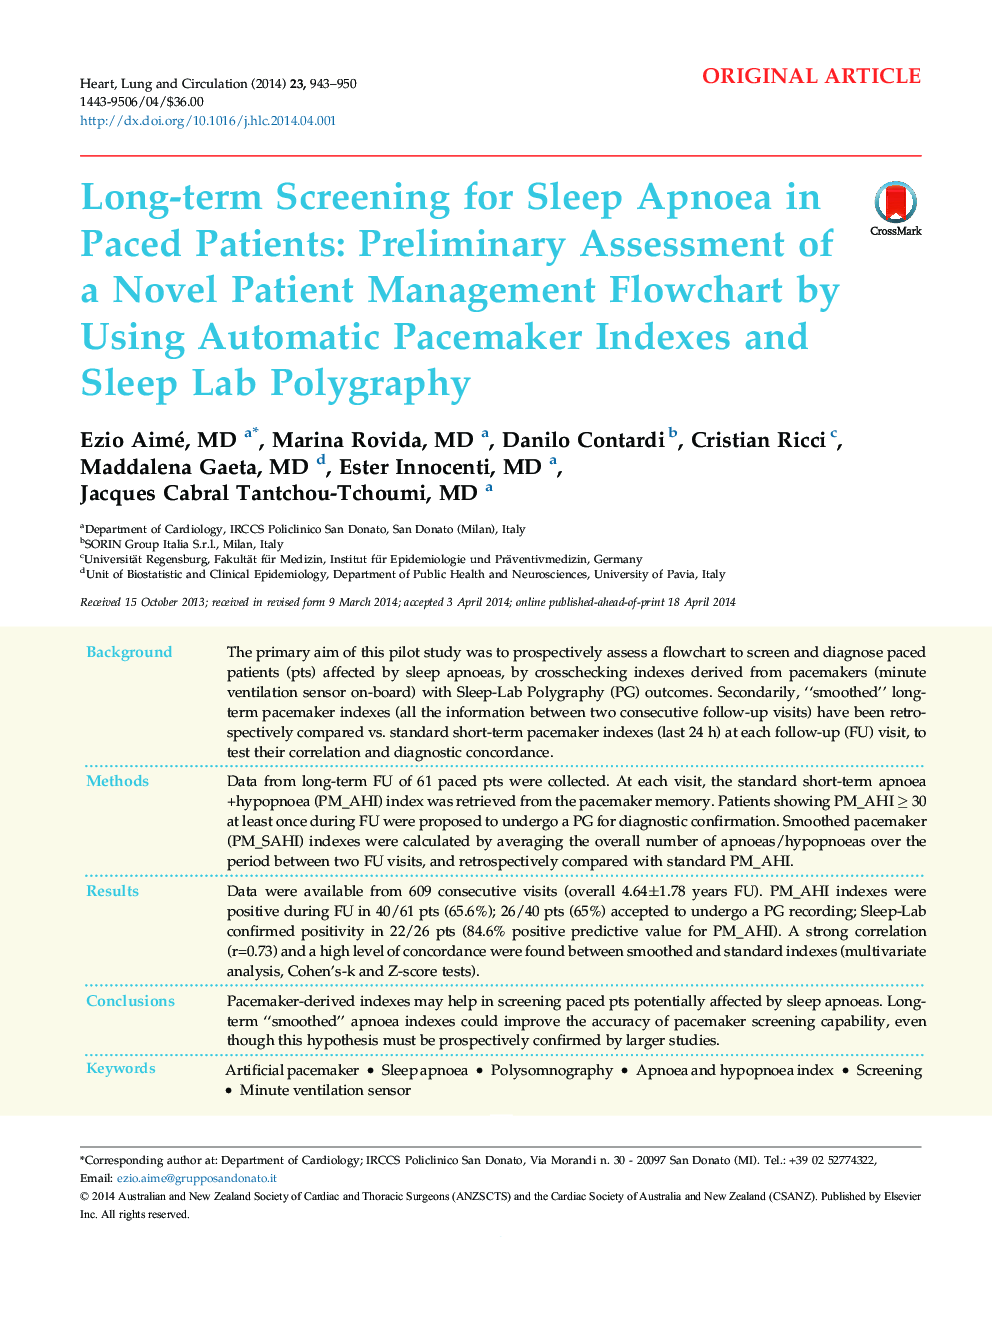 Long-term Screening for Sleep Apnoea in Paced Patients: Preliminary Assessment of a Novel Patient Management Flowchart by Using Automatic Pacemaker Indexes and Sleep Lab Polygraphy